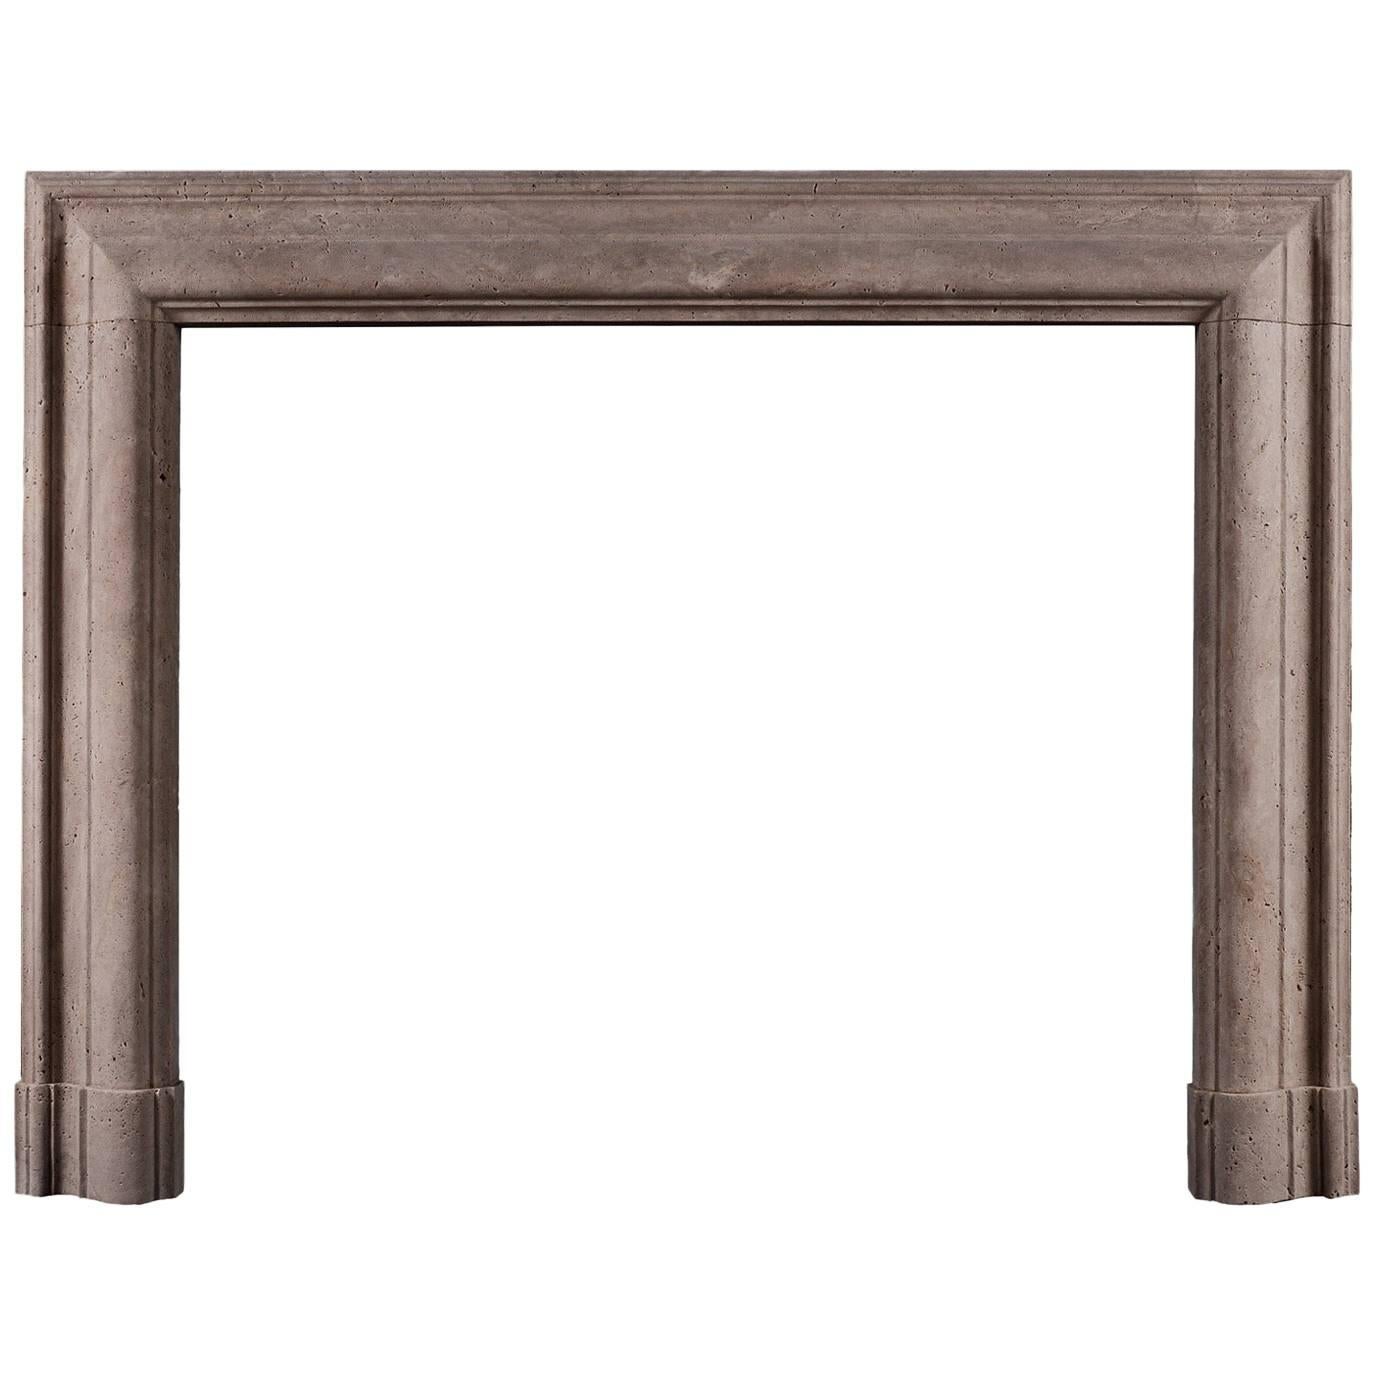 English Bolection Fireplace in Travertine Stone For Sale